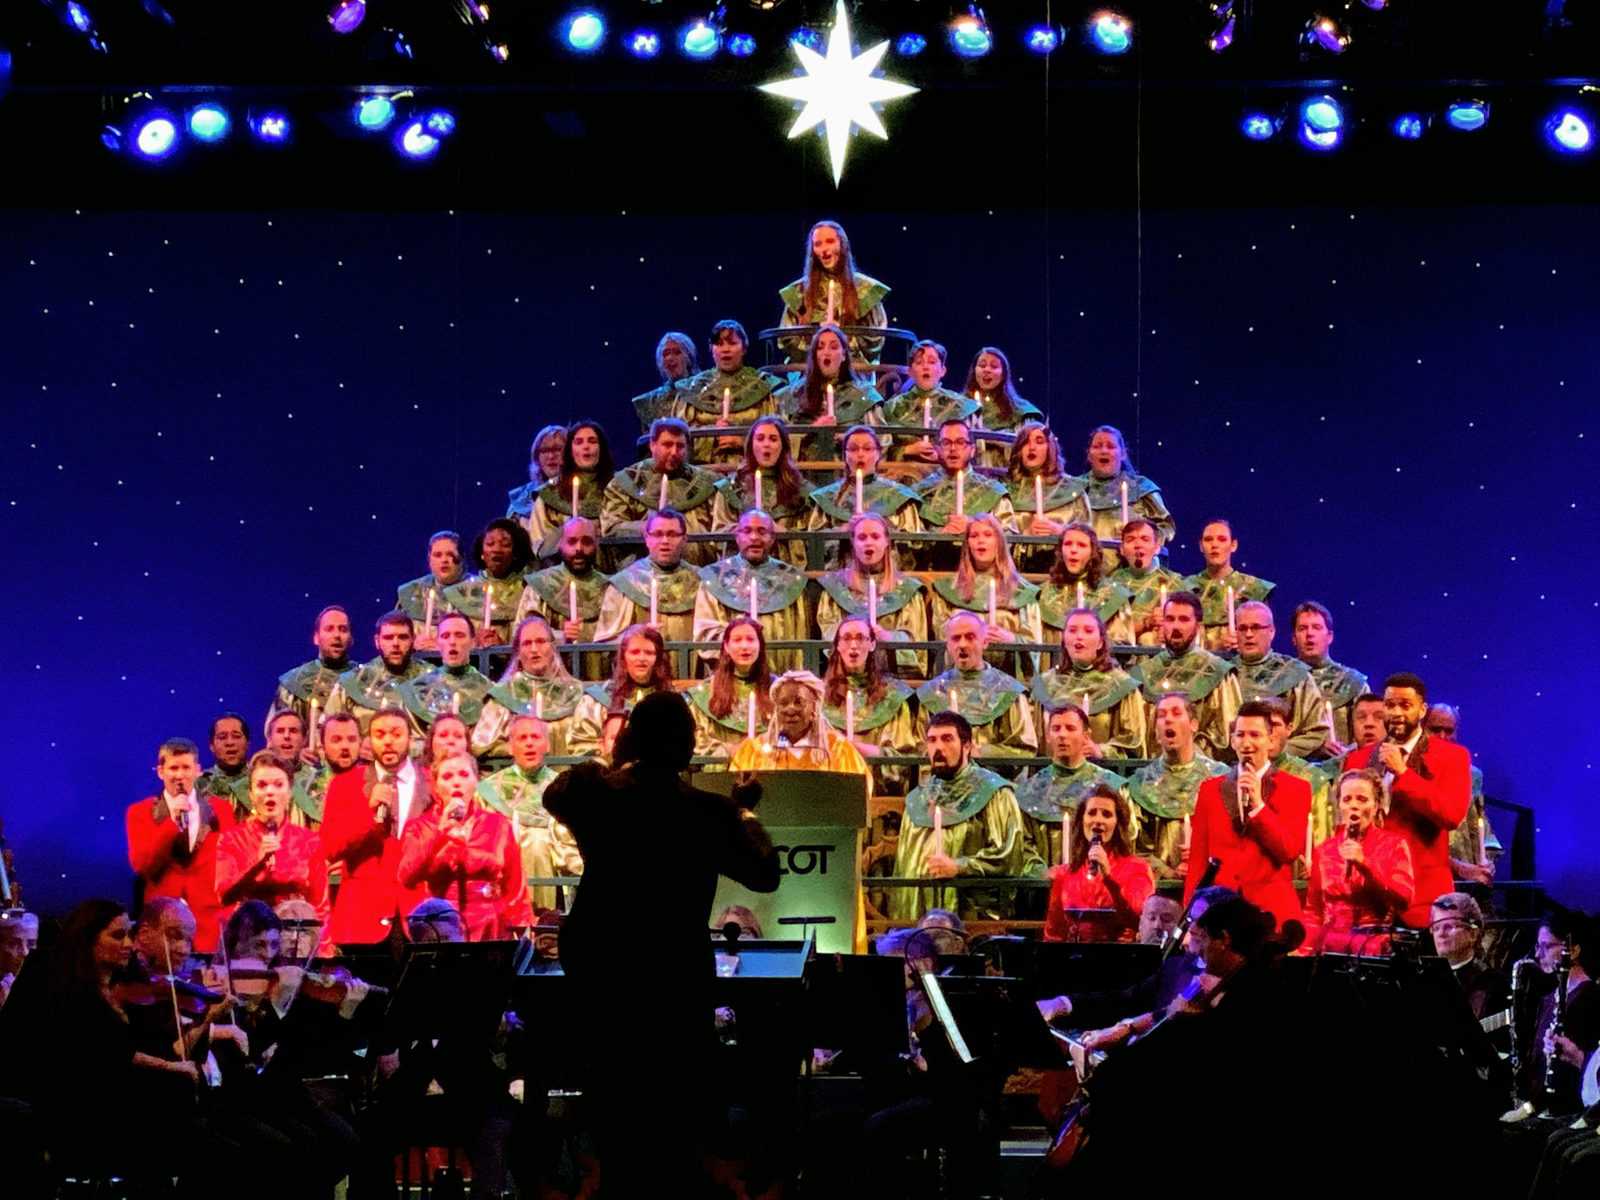 Candlelight Processional Returns To Epcot Starting November 26